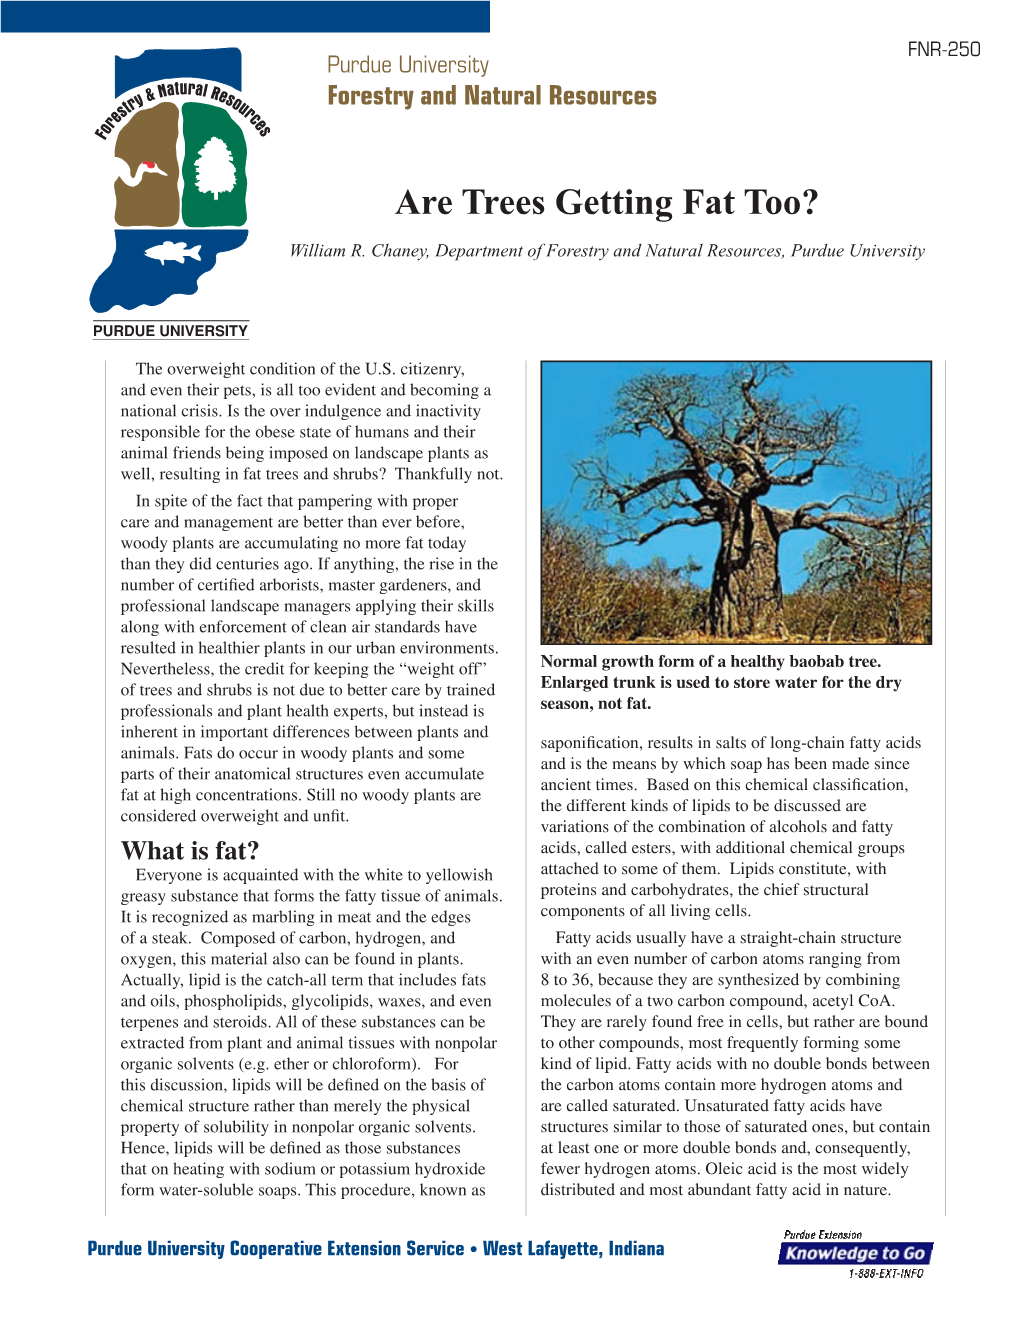 FNR 250 Are Trees Getting Fat Too?